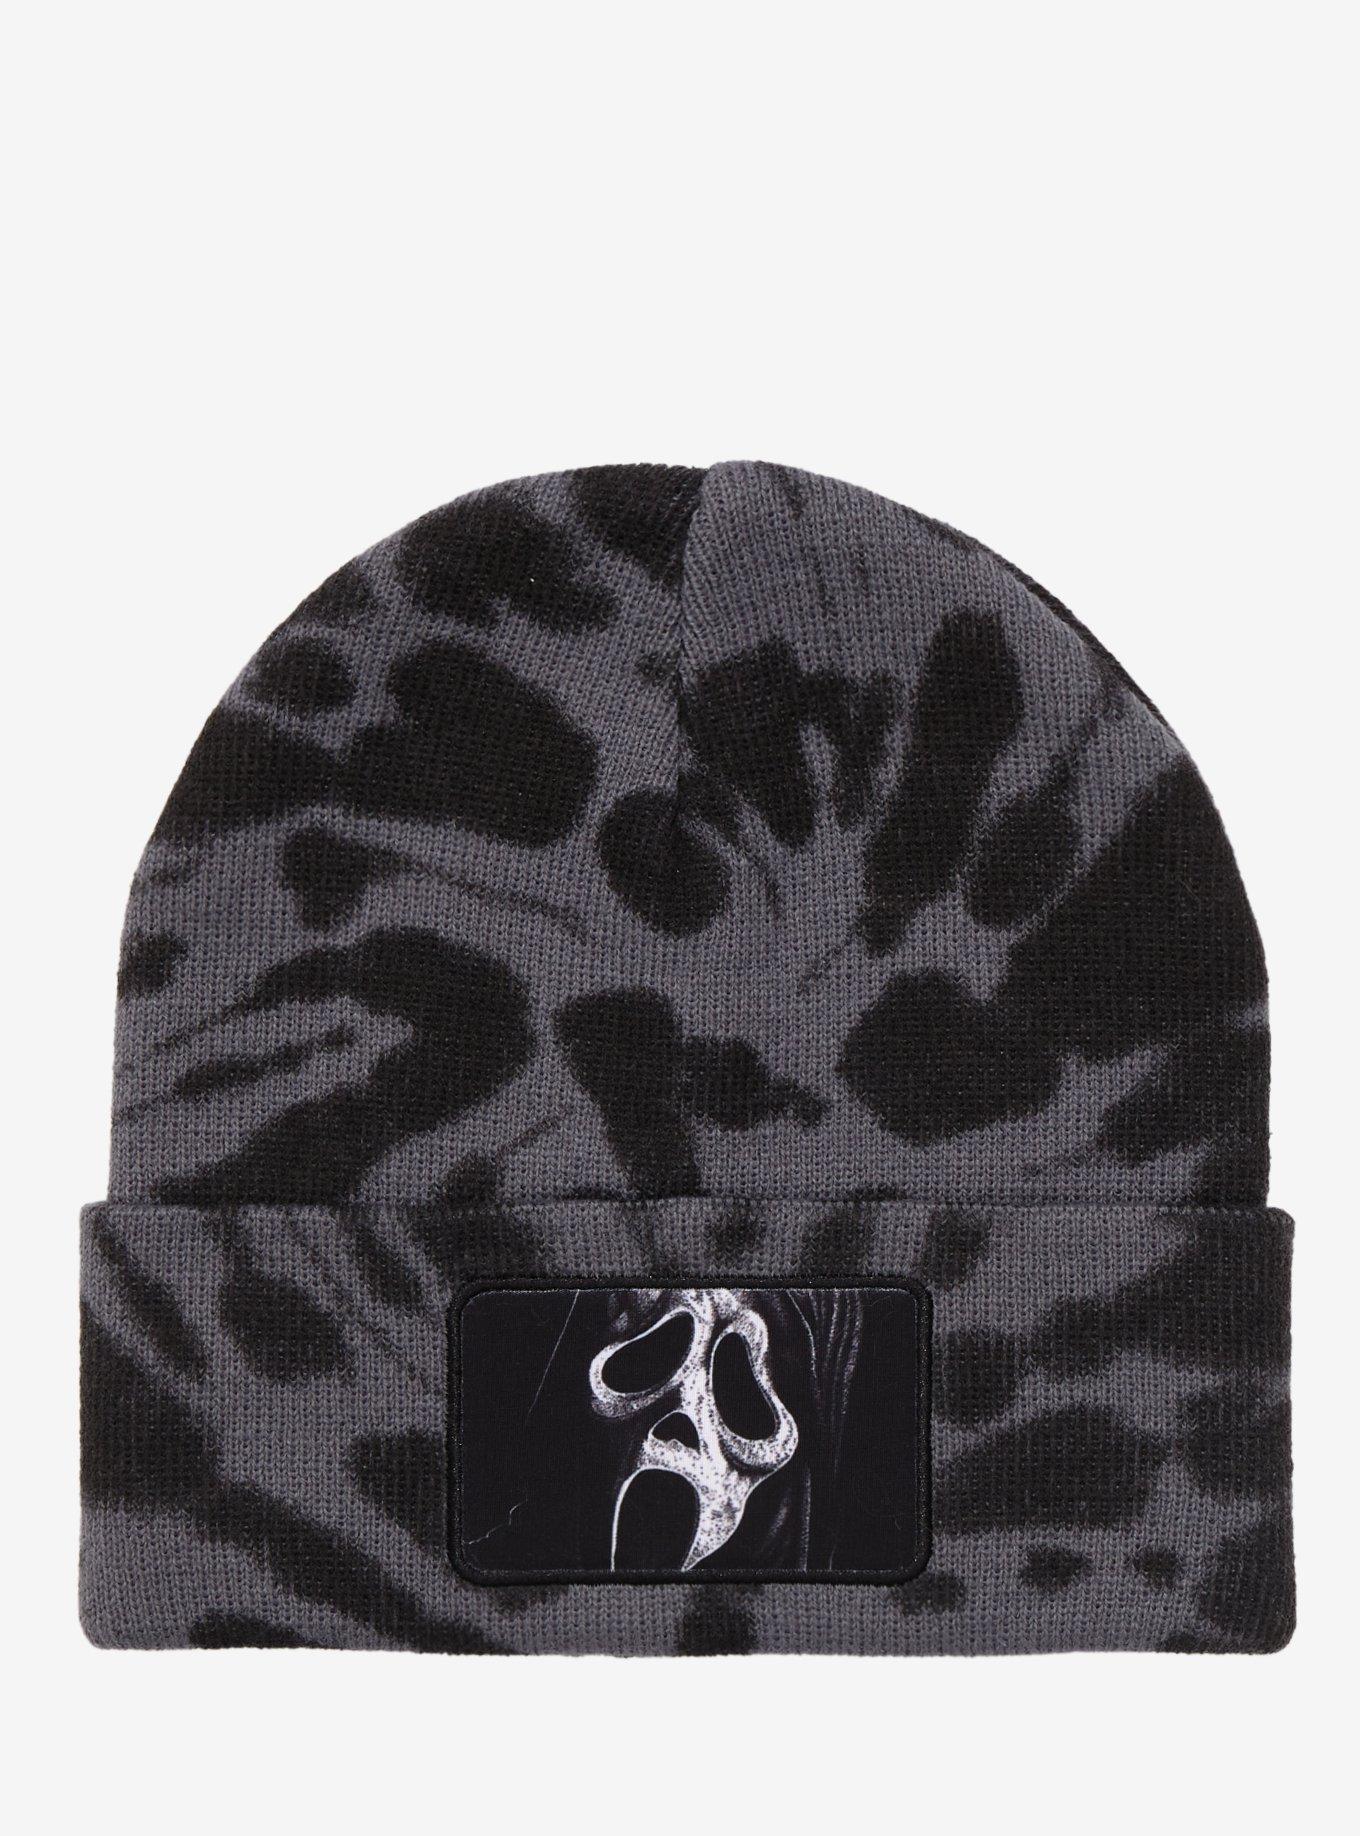 Scream Ghost Face Patch Grey Tie-Dye Beanie | Hot Topic